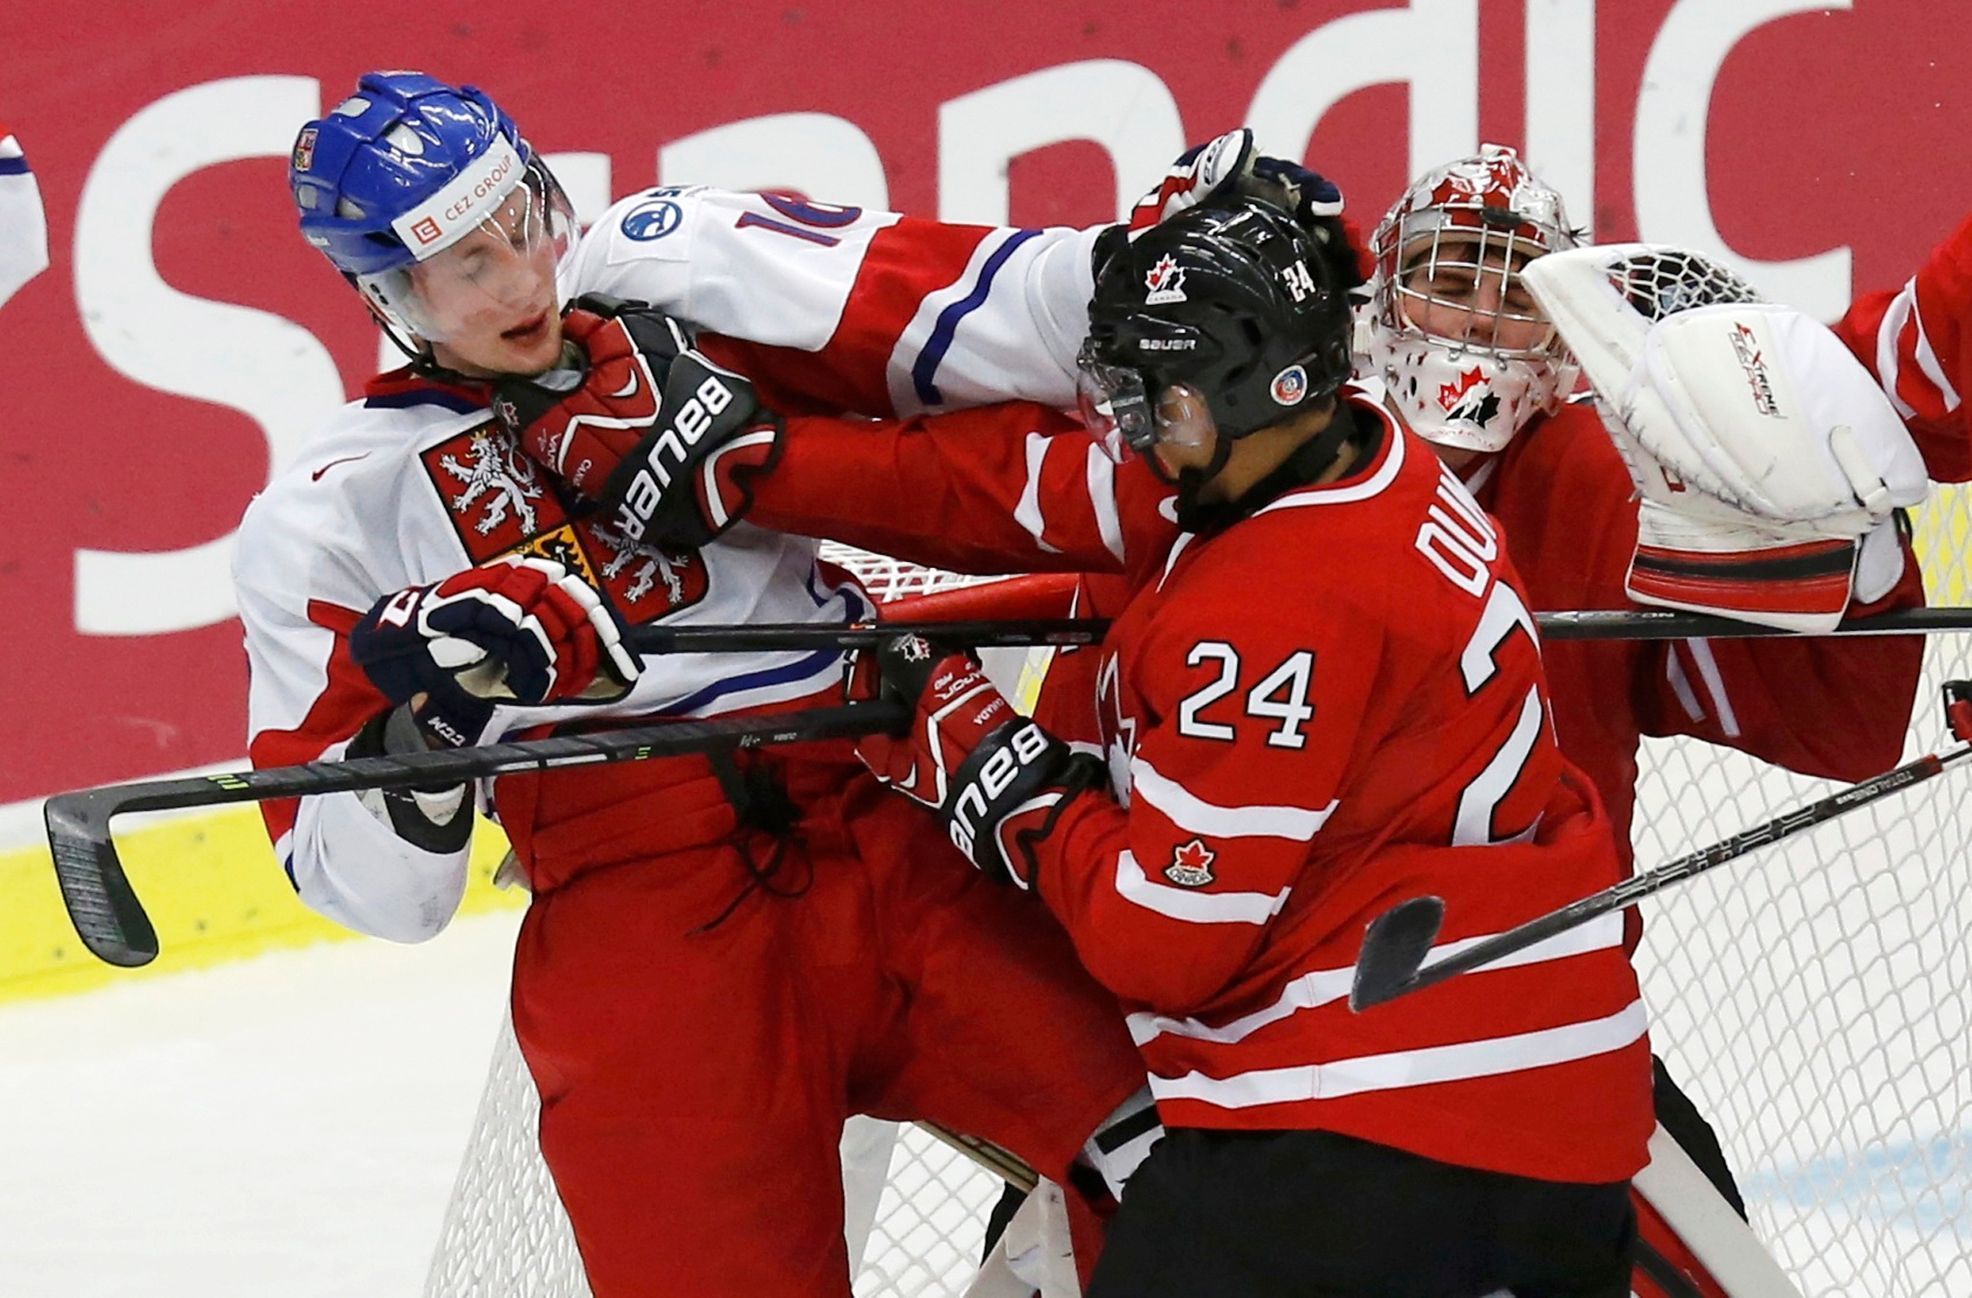 Canada's Dumba battles with Czech Republic's Faksa in front of Canada's goalie Paterson during the third period of their IIHF World Junior Championship ice hockey game in Malmo